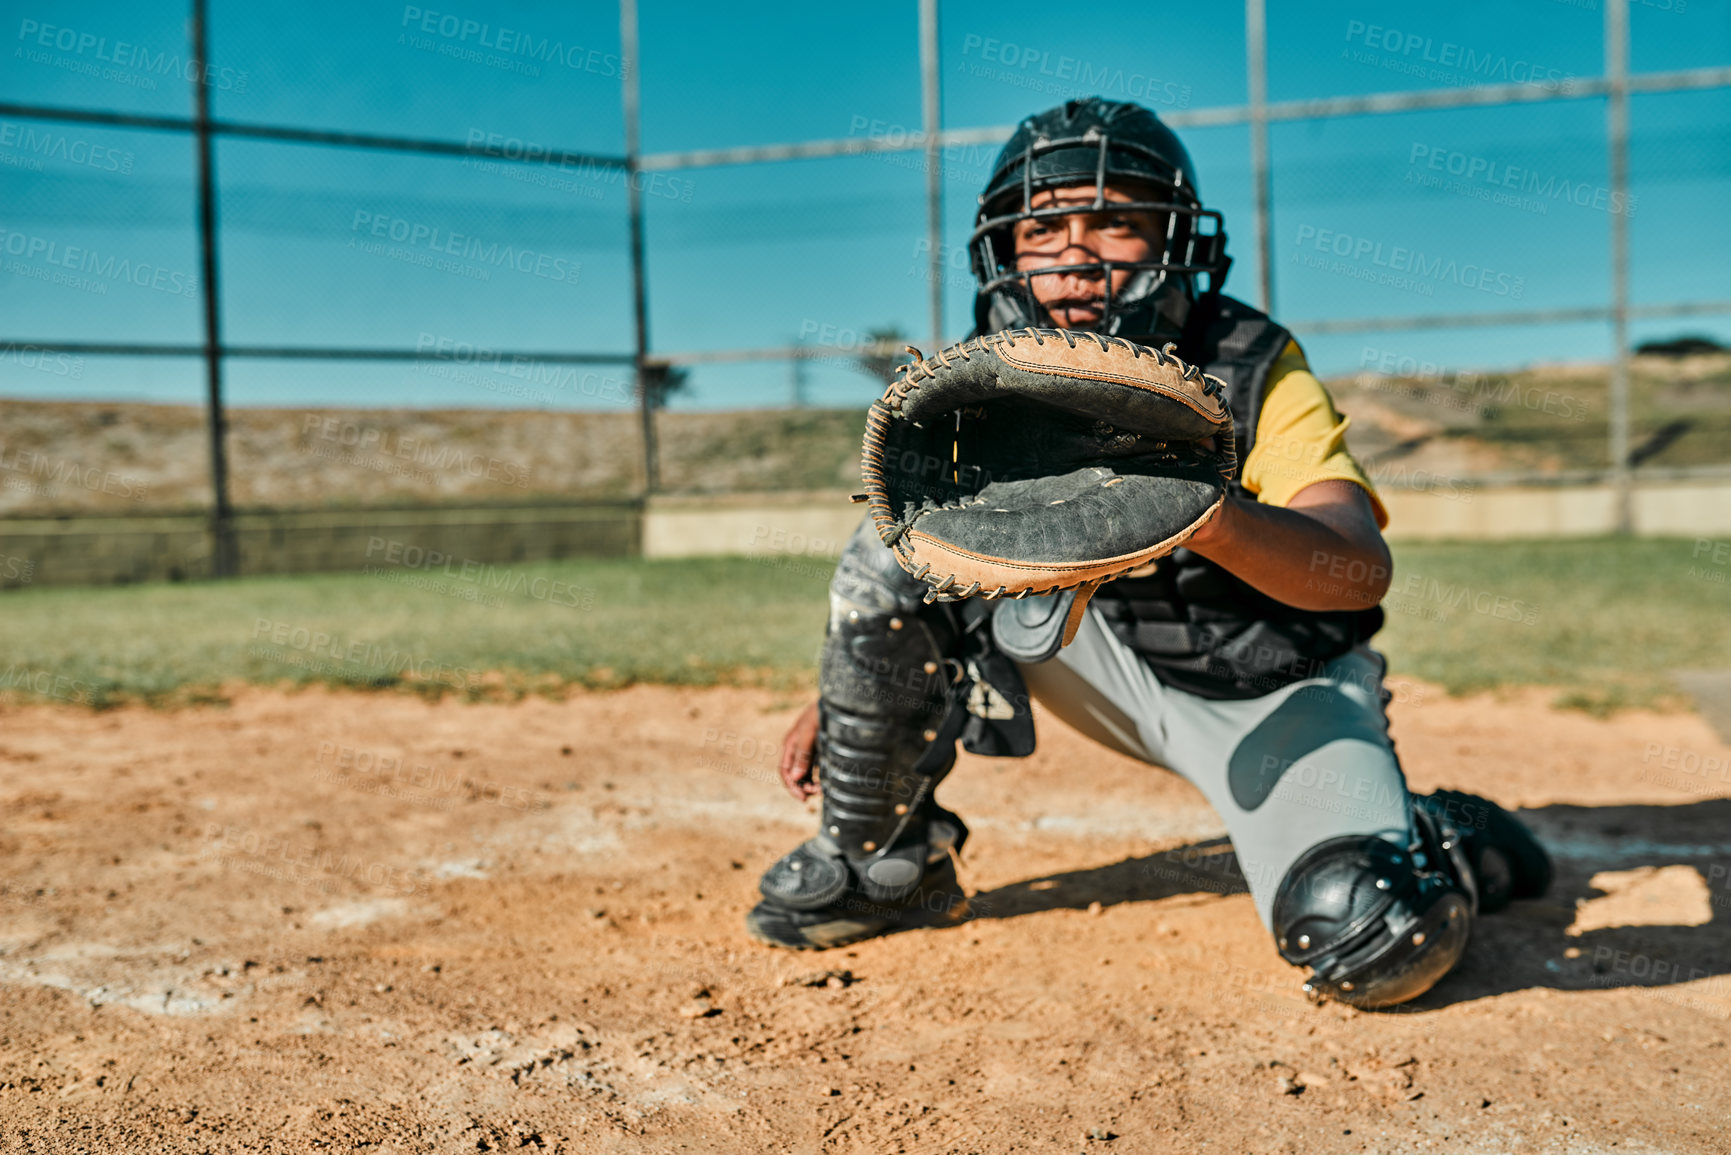 Buy stock photo Shot of the catcher sitting in position to catch the ball